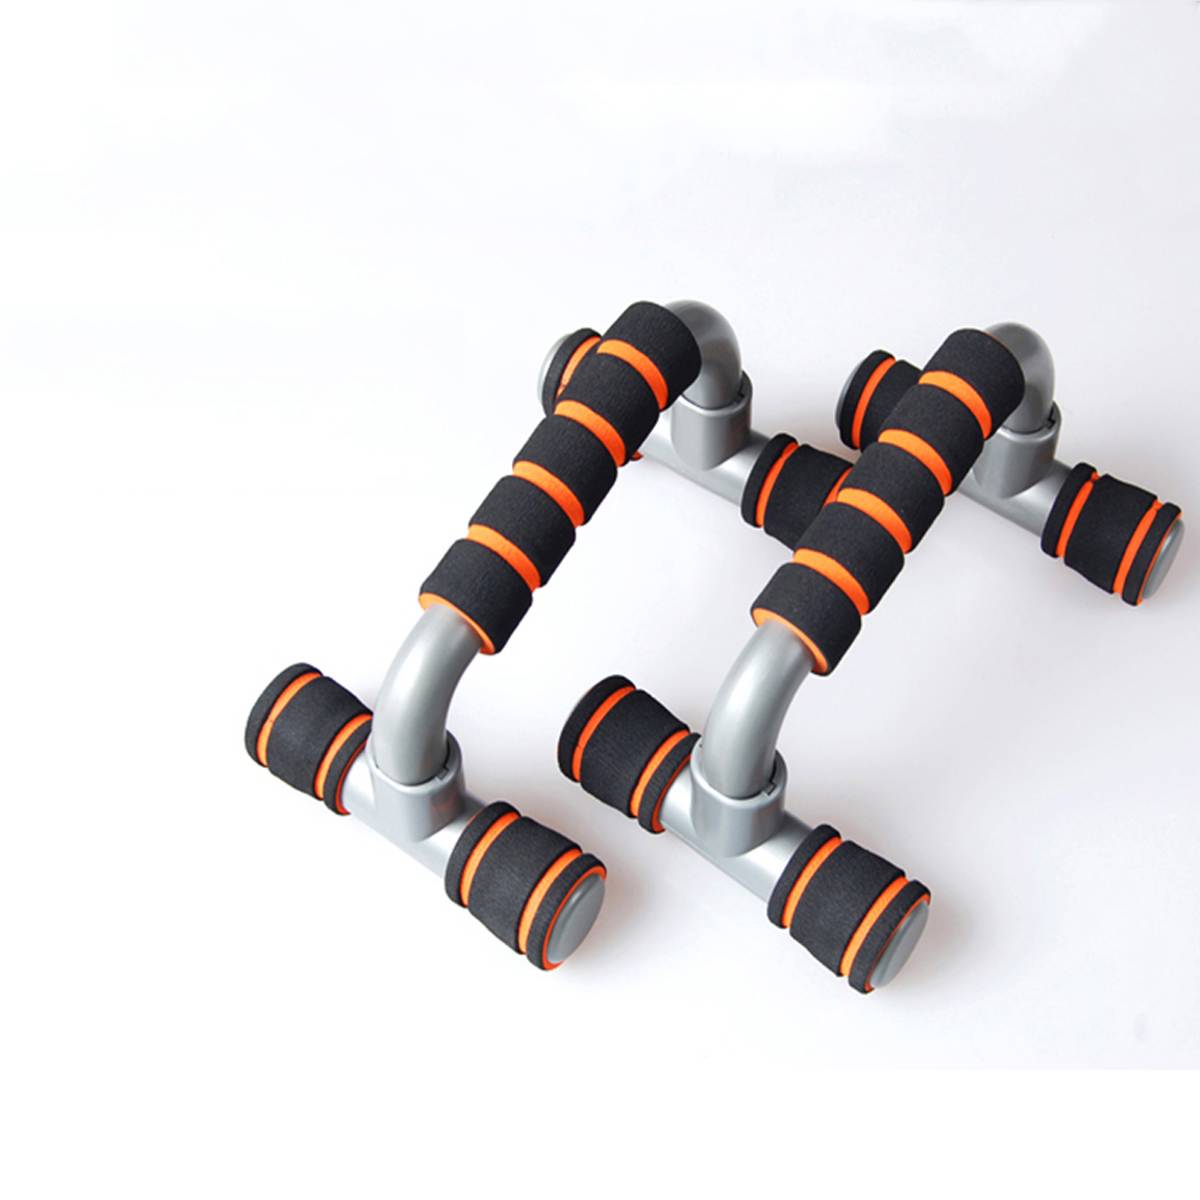 2pcs H I-shaped Fitness Push Up Bar Push-Ups Stands Tool Fitness Chest Training Exercise Sponge Hand Grip Trainer New